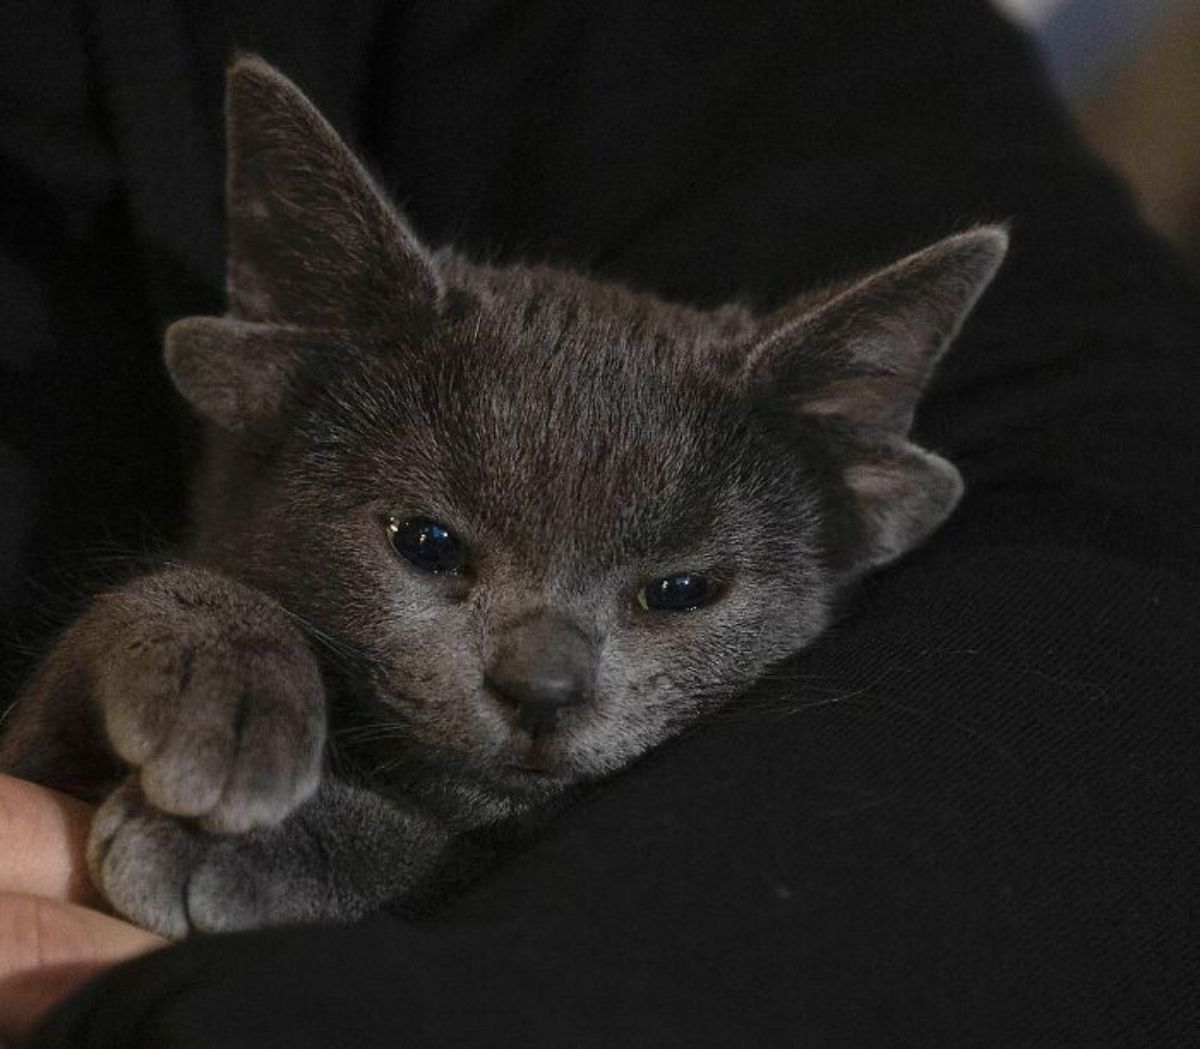 grey kitten with four ears being held by someone wearing black